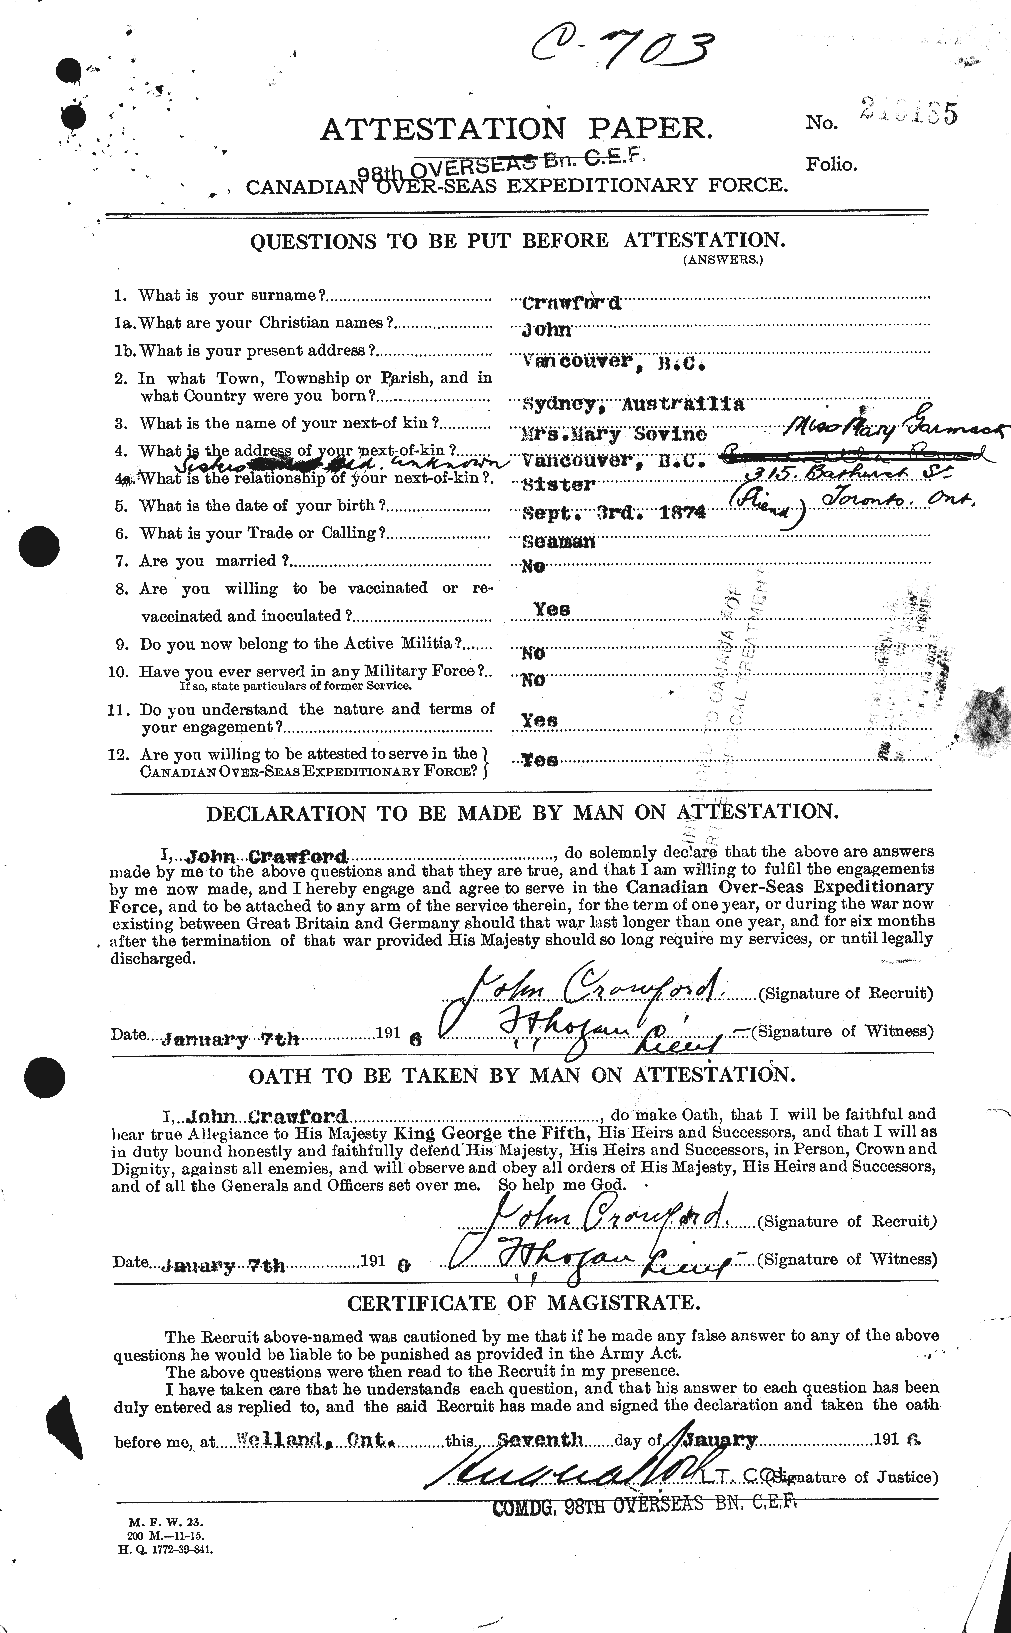 Personnel Records of the First World War - CEF 062446a